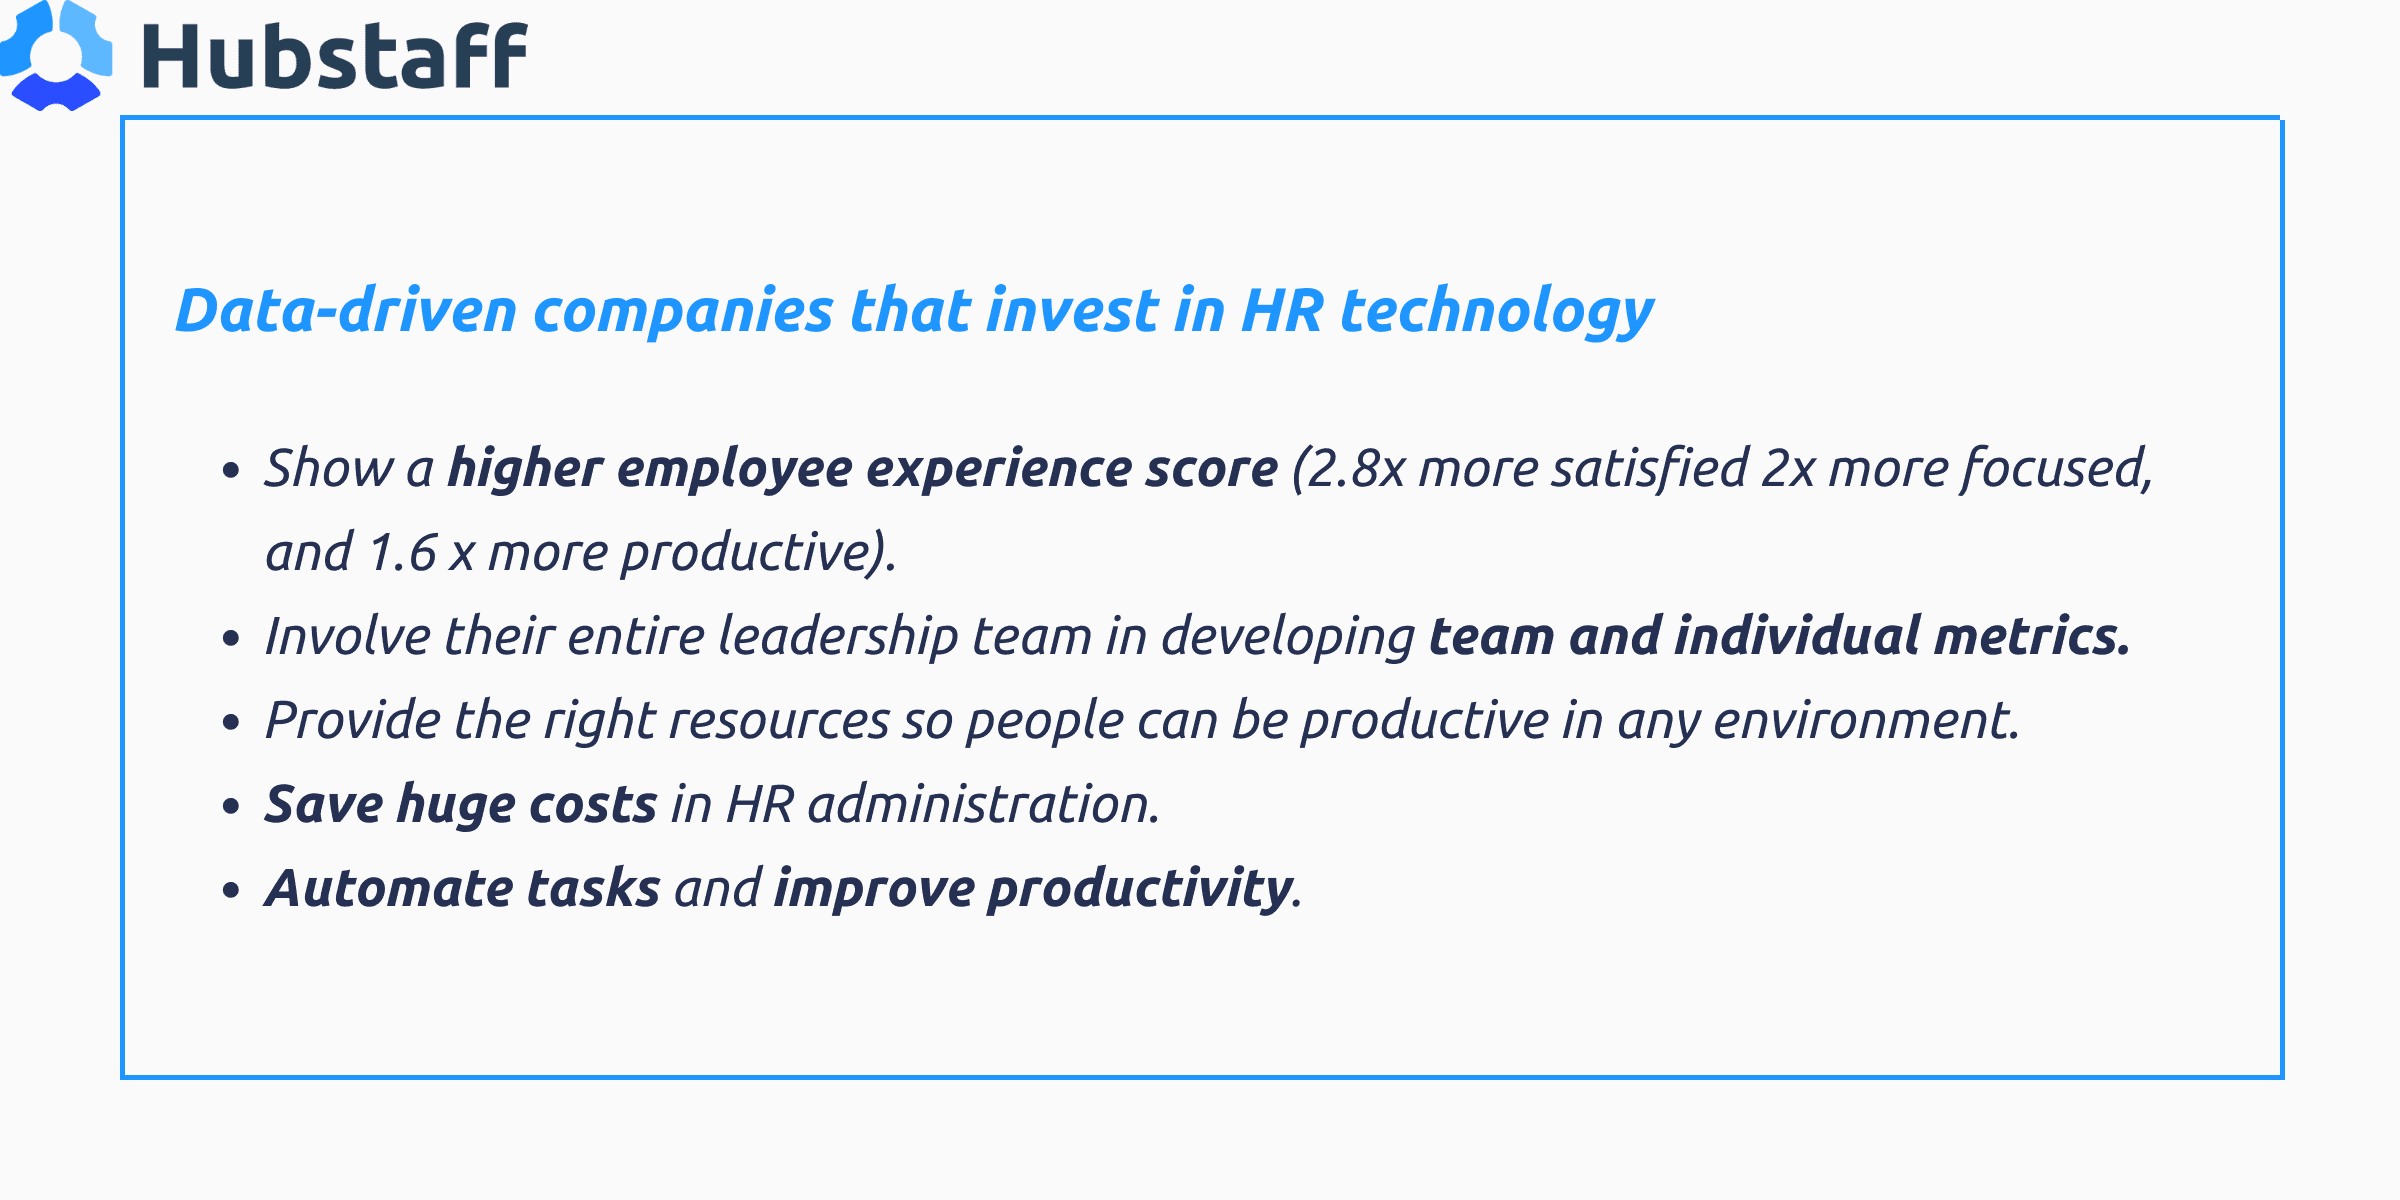 Benefits of investing in HR technology